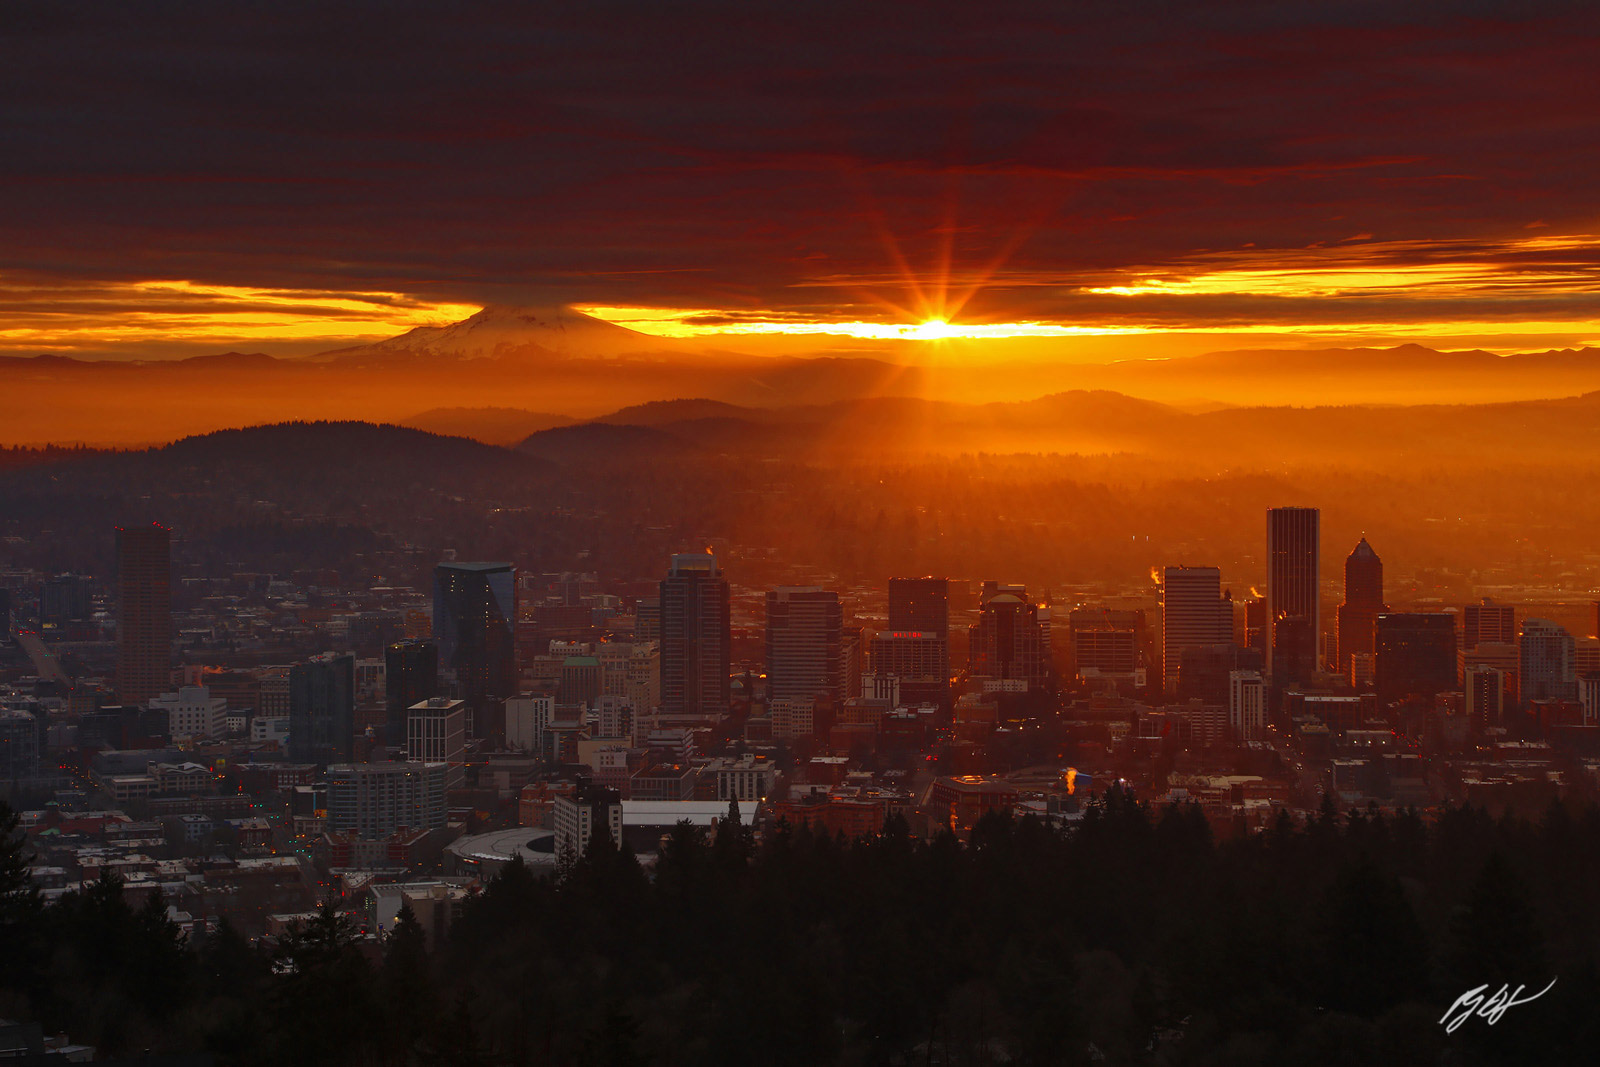 Sunrise and Sunstar over Portland and Mt Hood from the Pittock Mansion in Portland Oregon